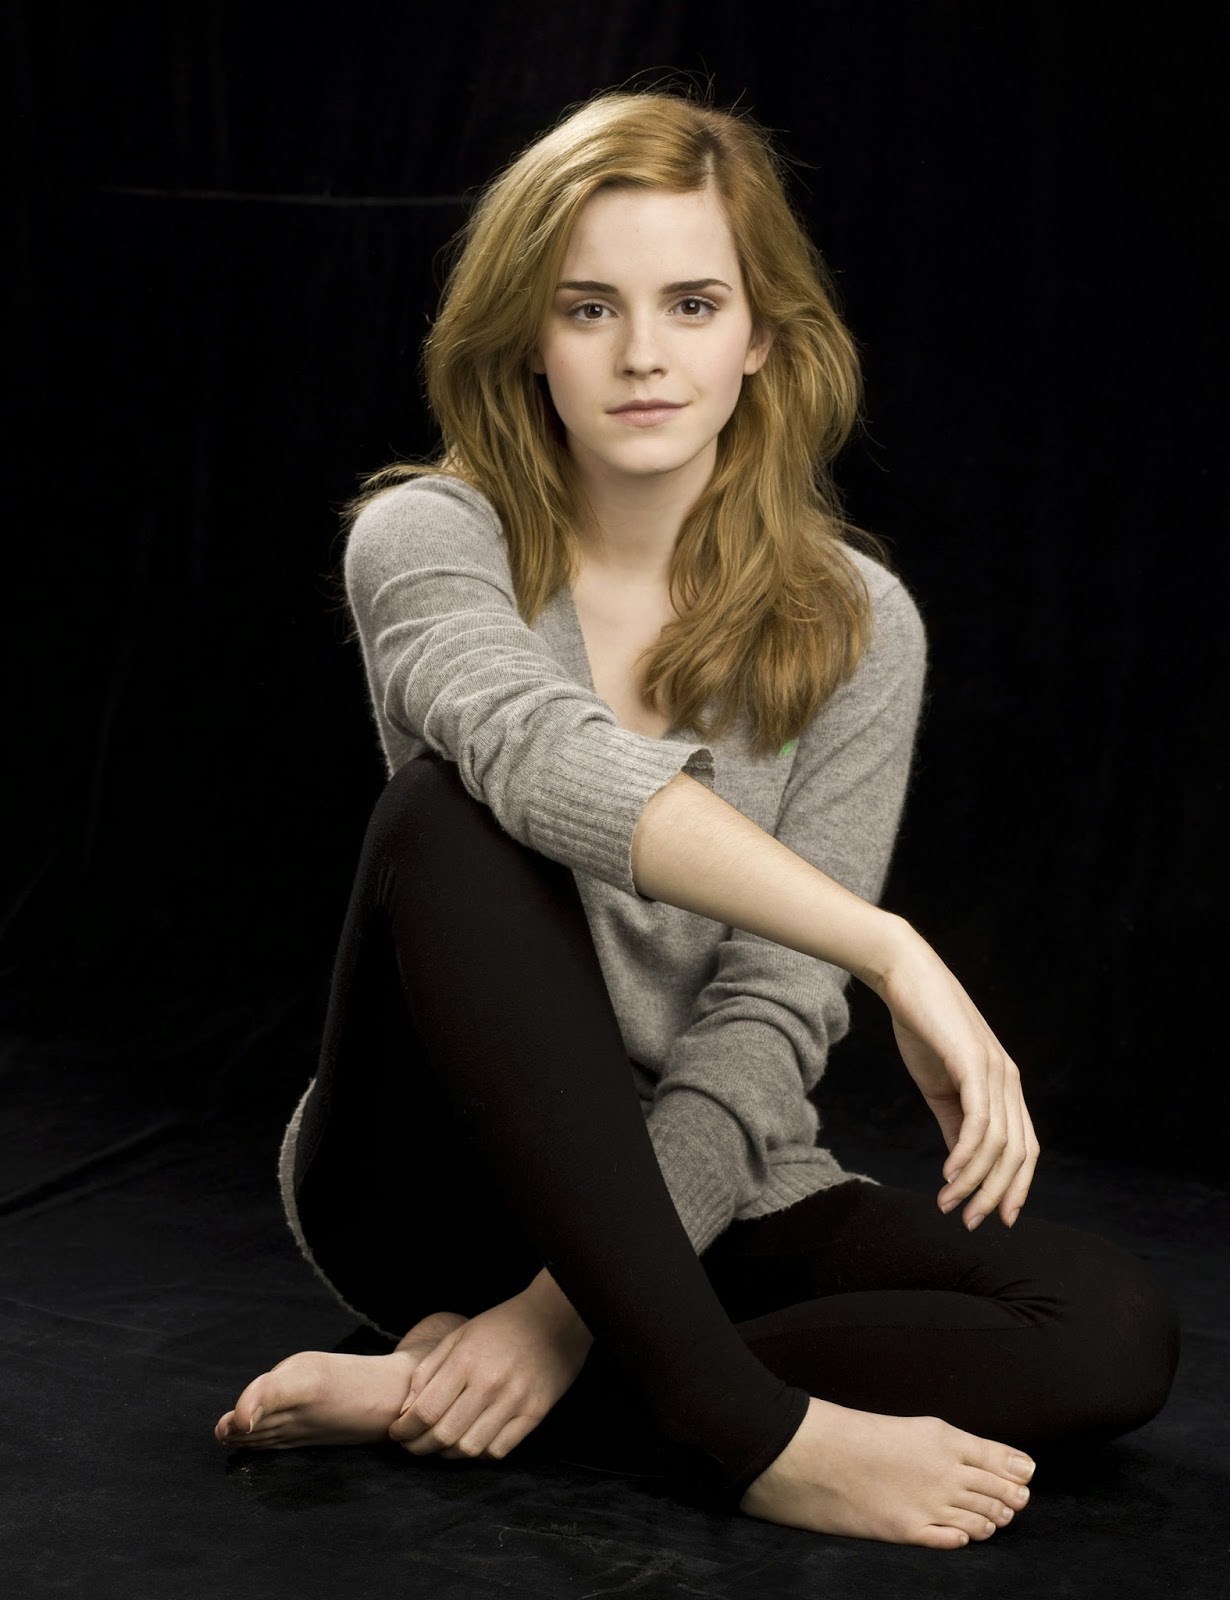 celebrity legs and feets : emma watson cute feet and legs1230 x 1600